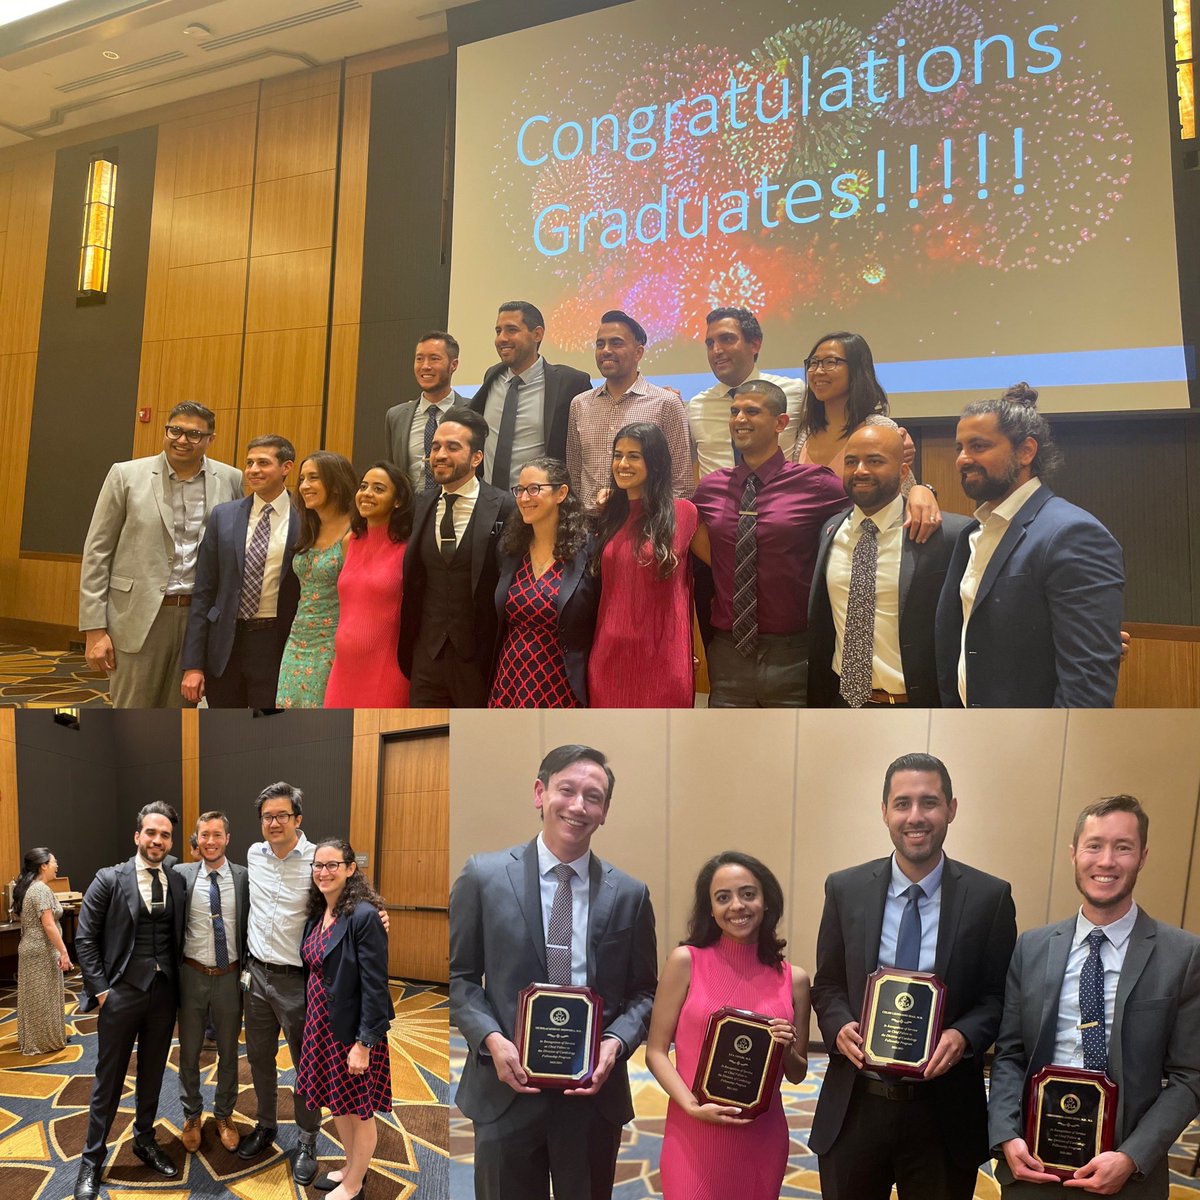 A special @DOM_UCLA @UCLAHealth @dgsomucla @uclaCVfellows #bruinhearts in person graduation this yr…proud & 😢 to send off this amazing class of cardiologists & future leaders & my #cardioonc clinic fellows! Congrats & 🙏 @kewatson @netta_doc @HayaseJustin @arafiqmd1 @gcfmd